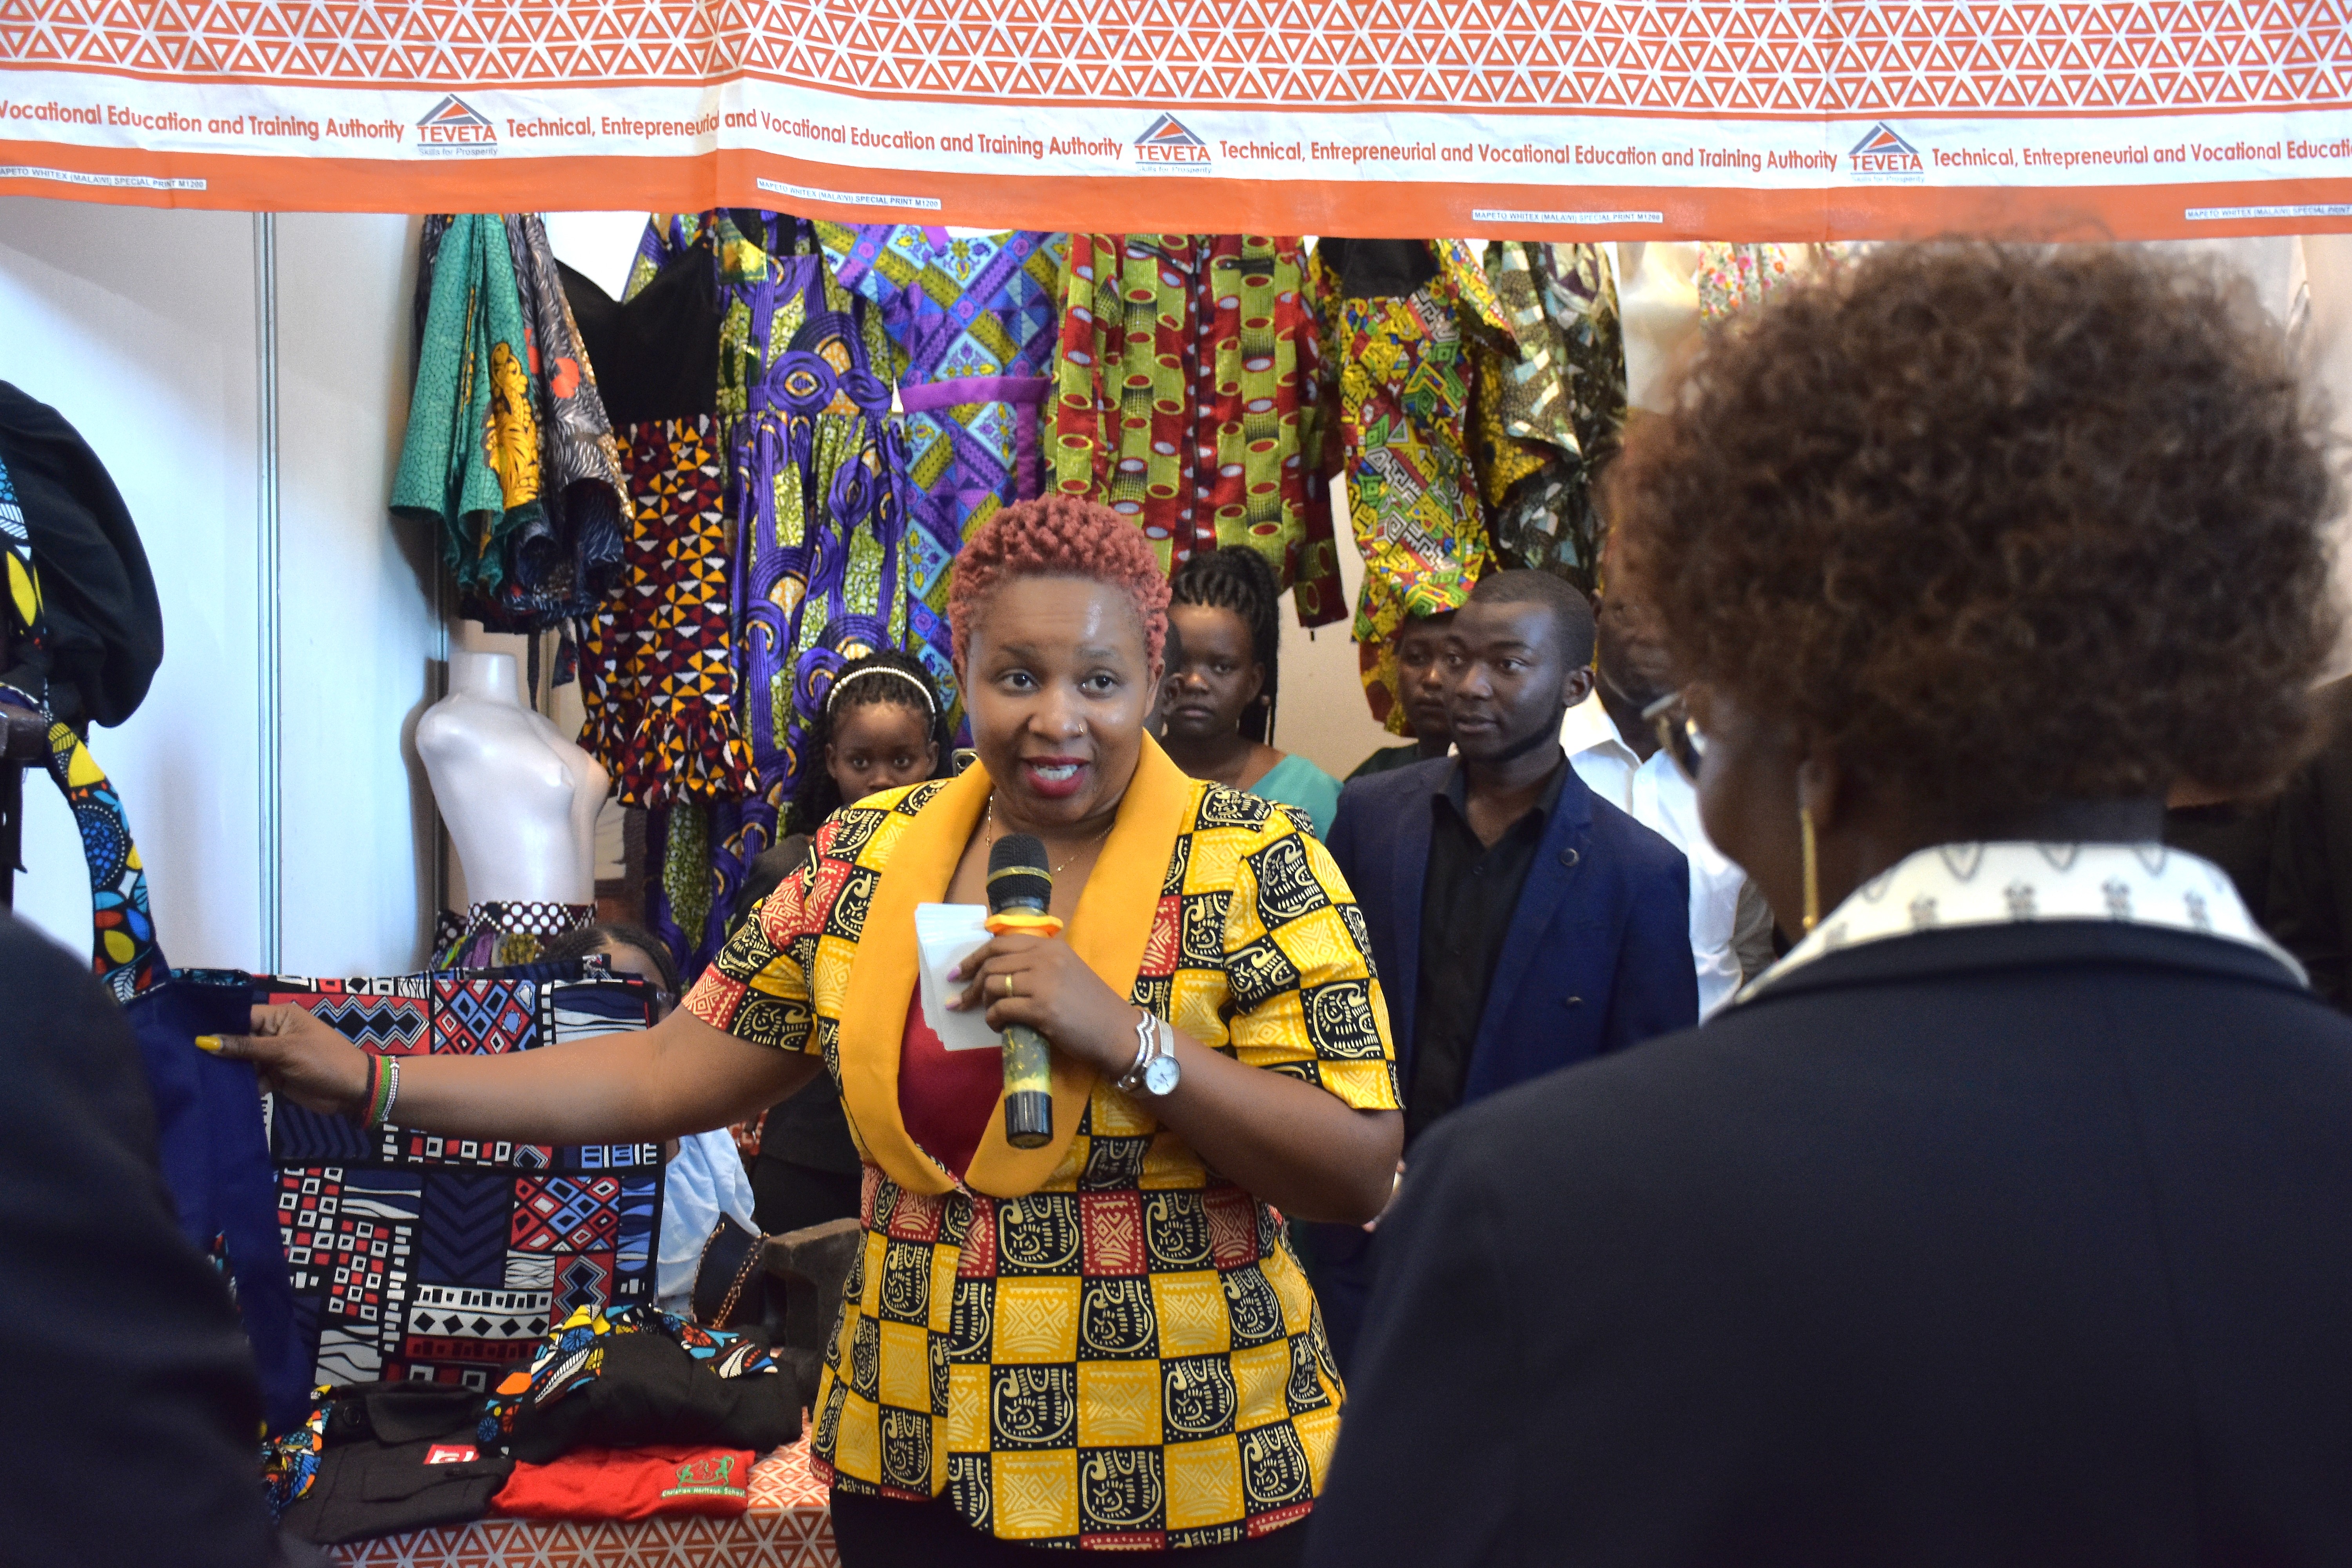 Harnessing the entrepreneurial spirit in youth around Malawi